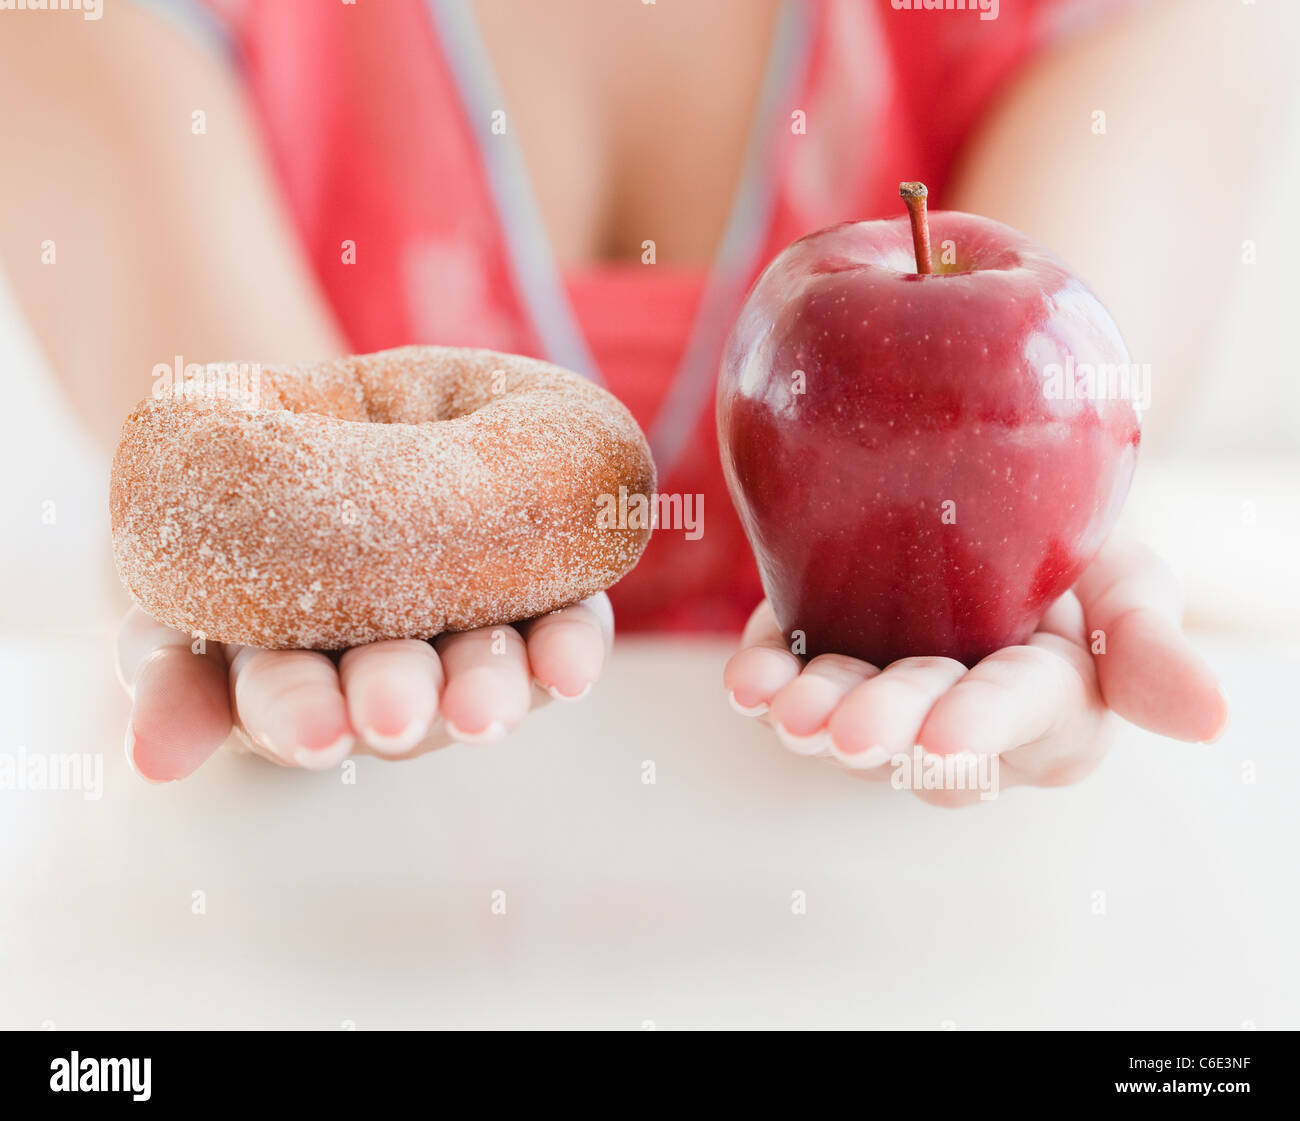 USA, New Jersey, Jersey City, Close up of woman's hands holding donut et Apple Banque D'Images